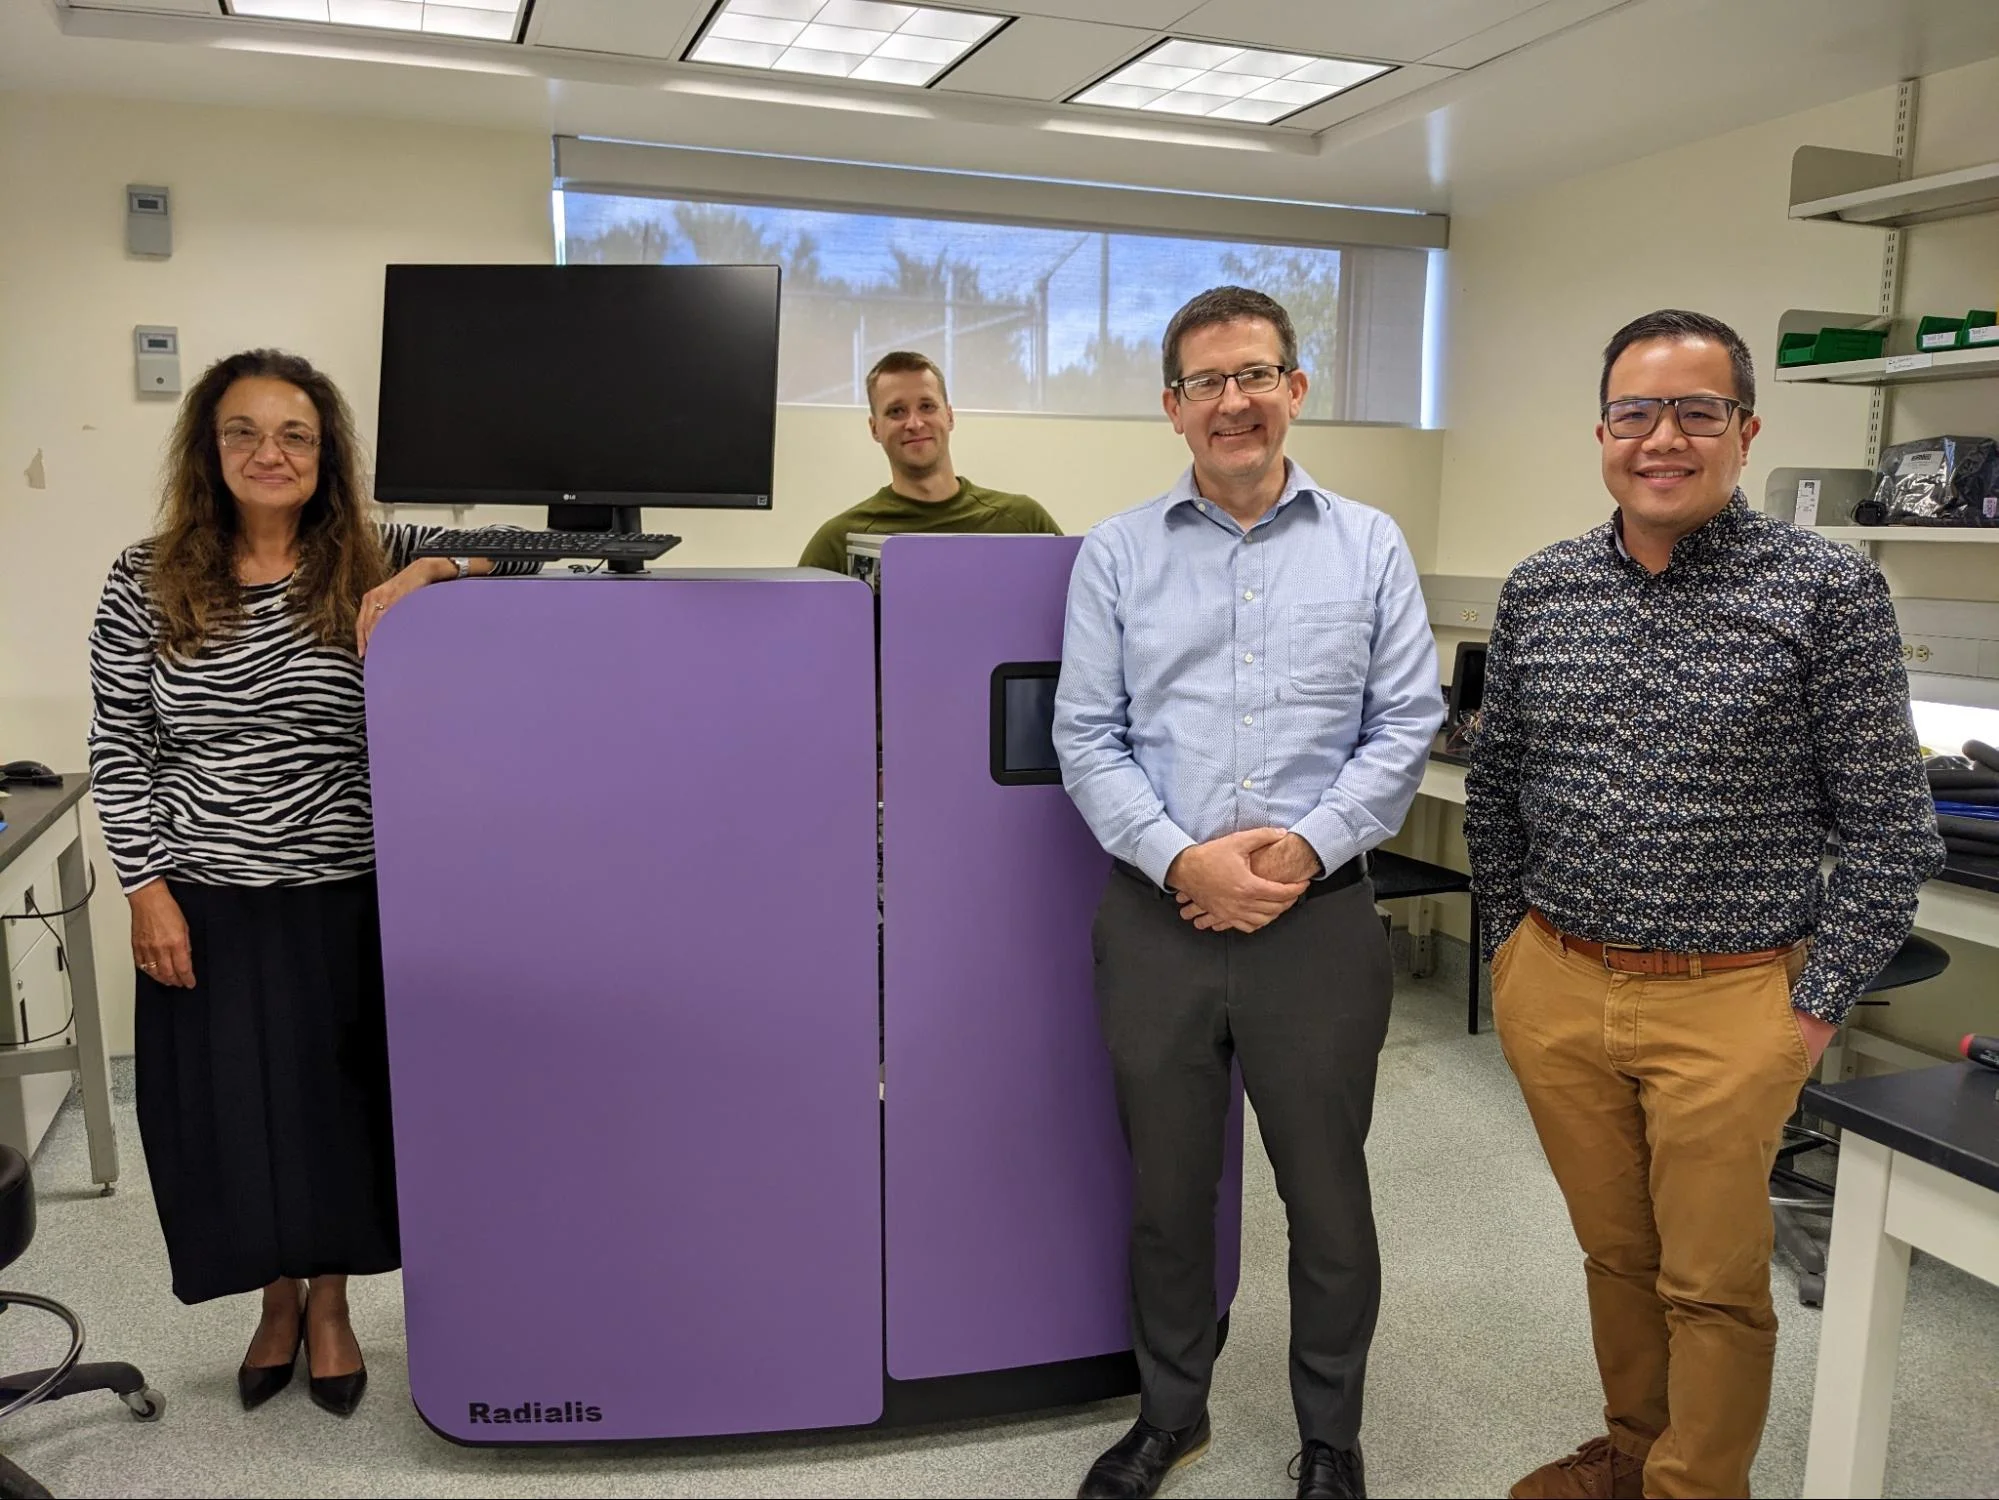 Radialis Team with Leo from INOVAIT smile and pose with the Radialis PET Imager